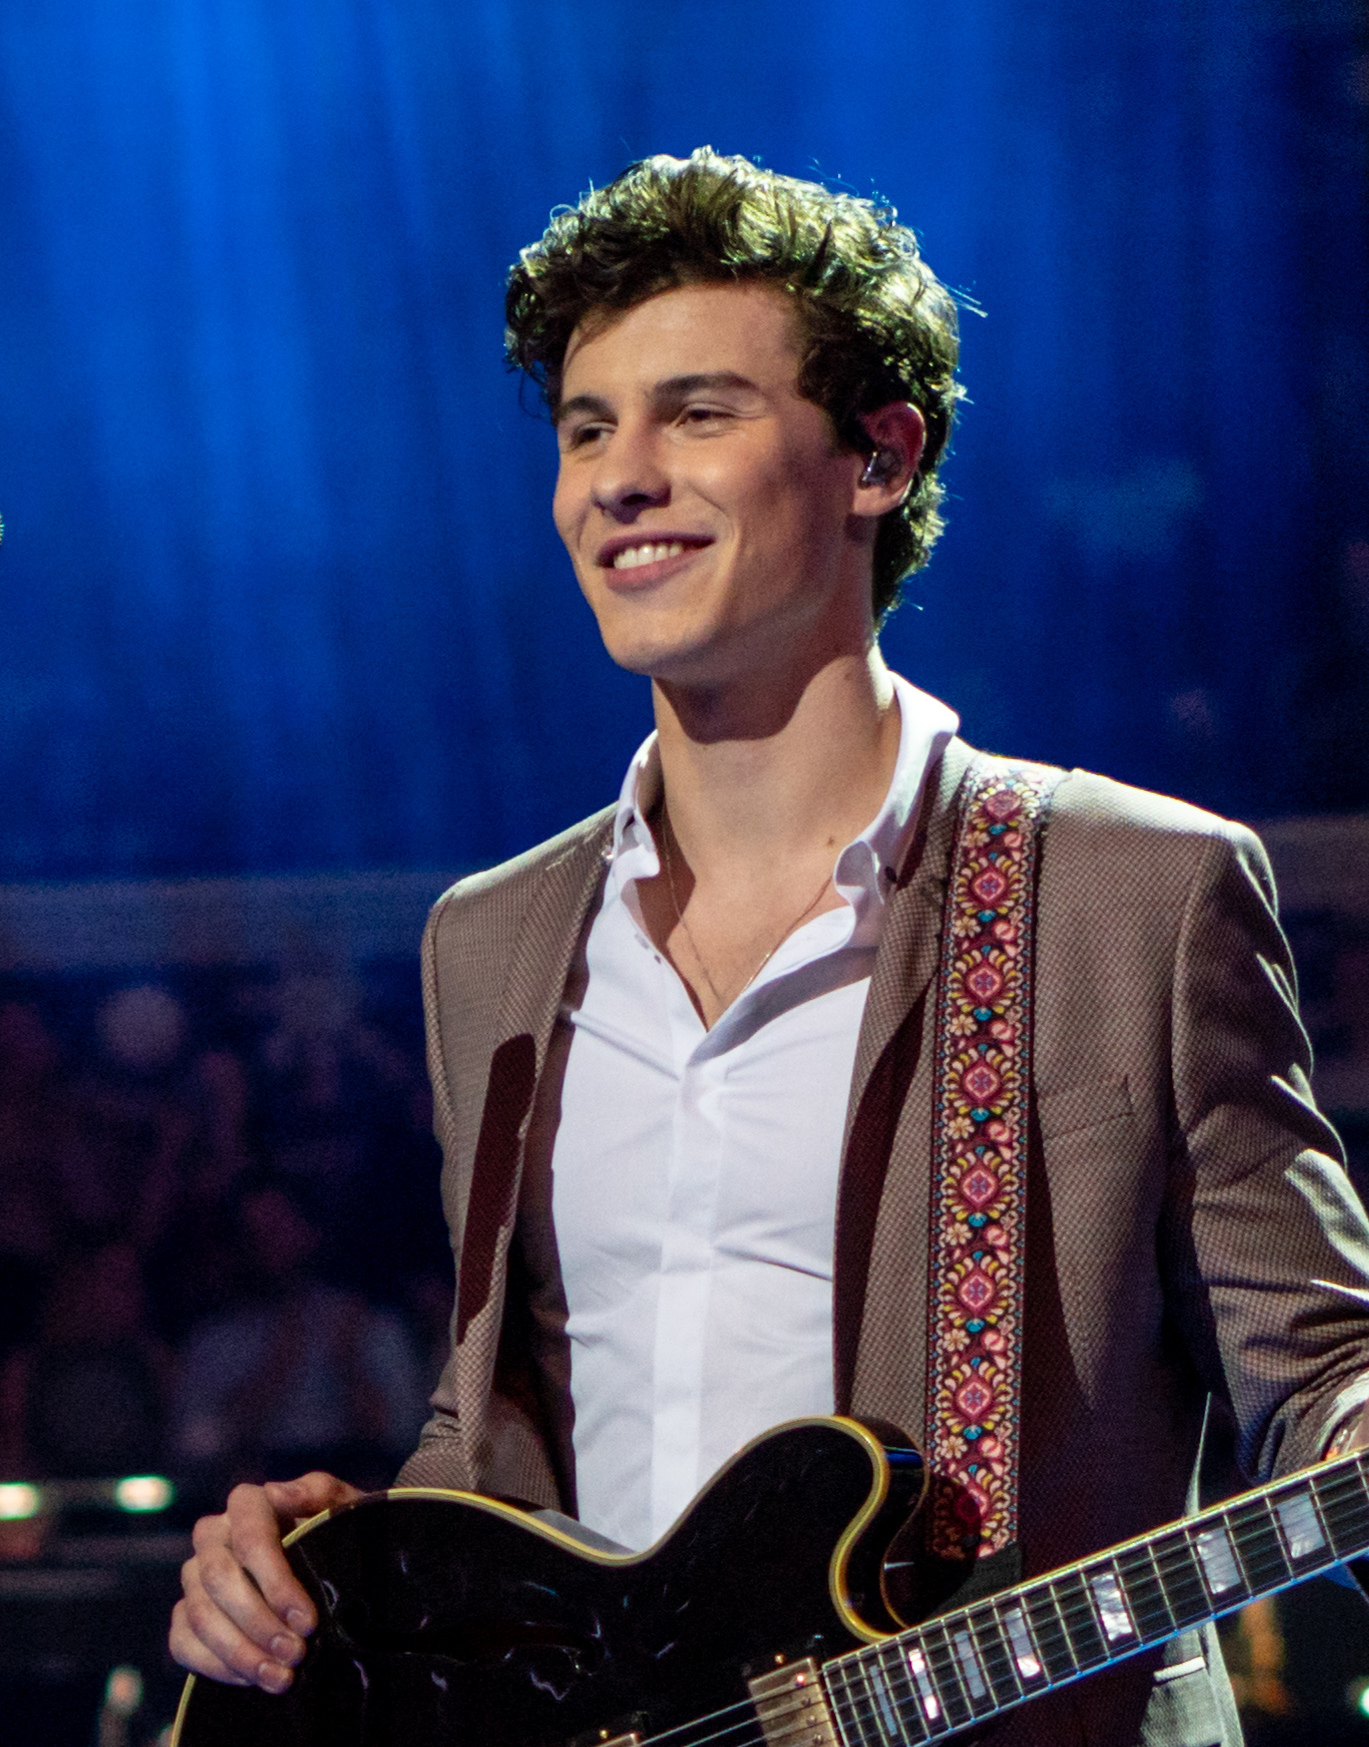 Opening up about anxiety was scary, says Shawn Mendes